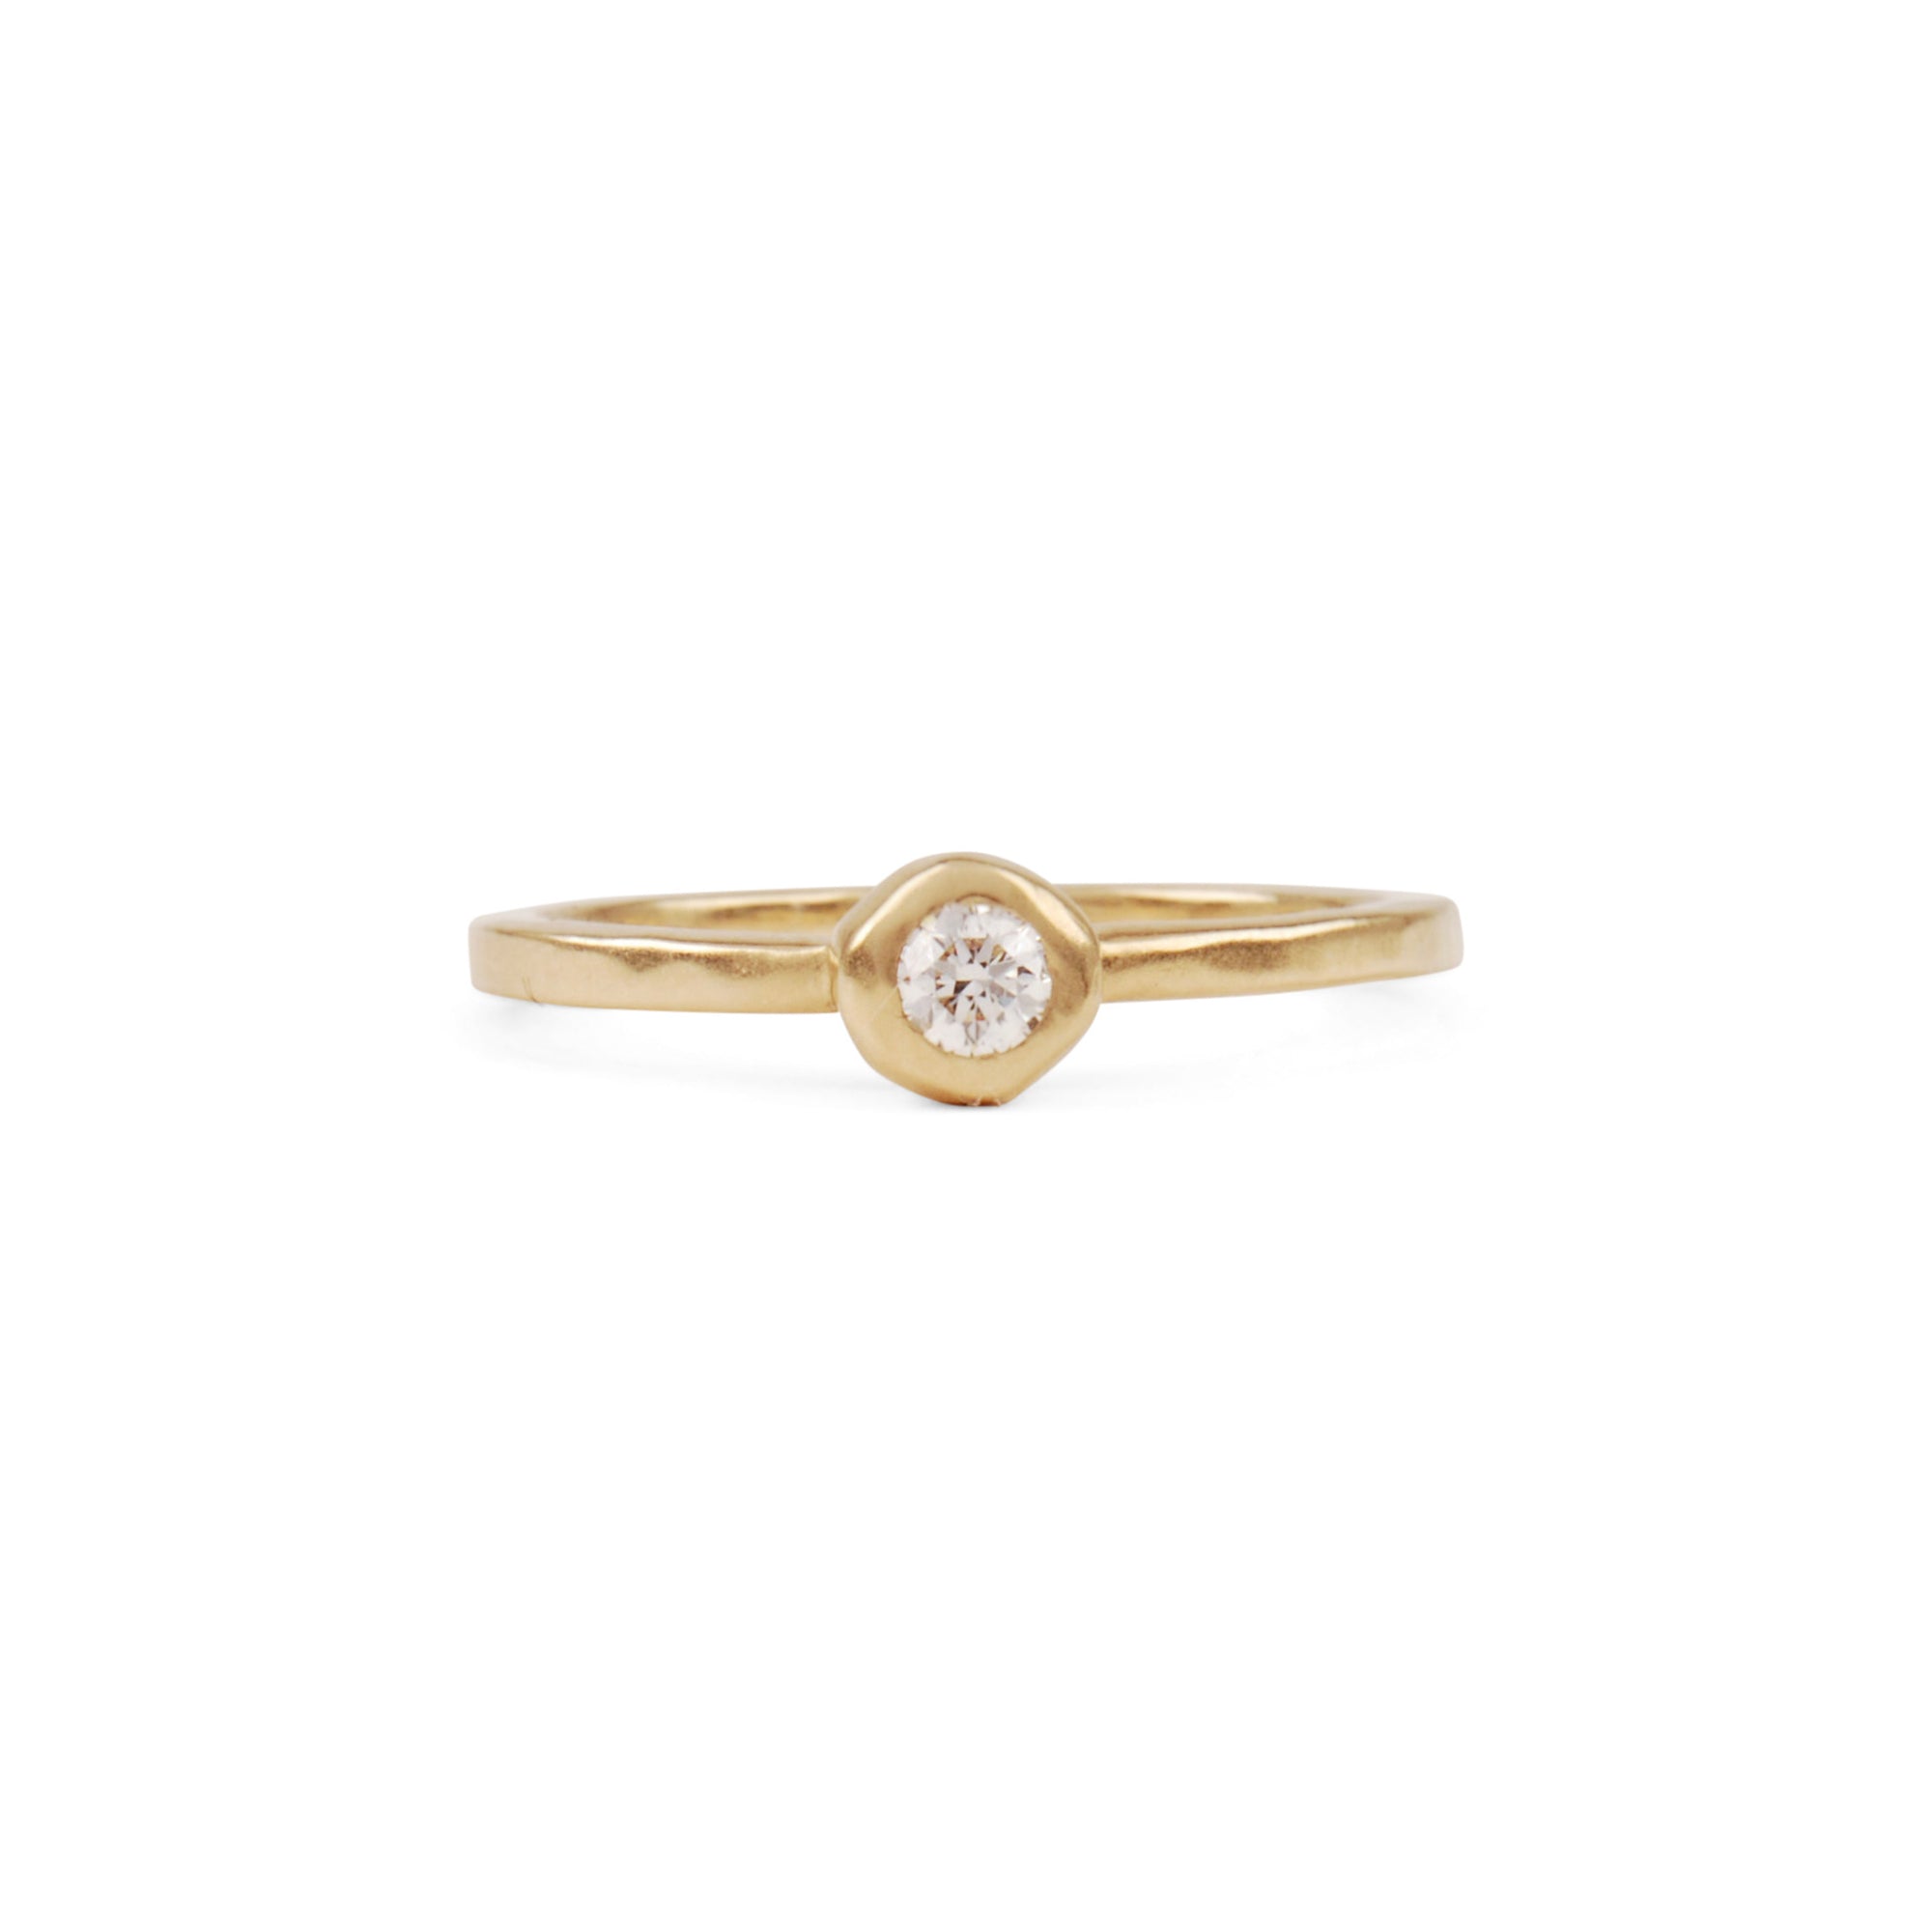 Minimal, organic, and unique, the Classic Diamond Solitaire Ring is the perfect way to commemorate a special occasion